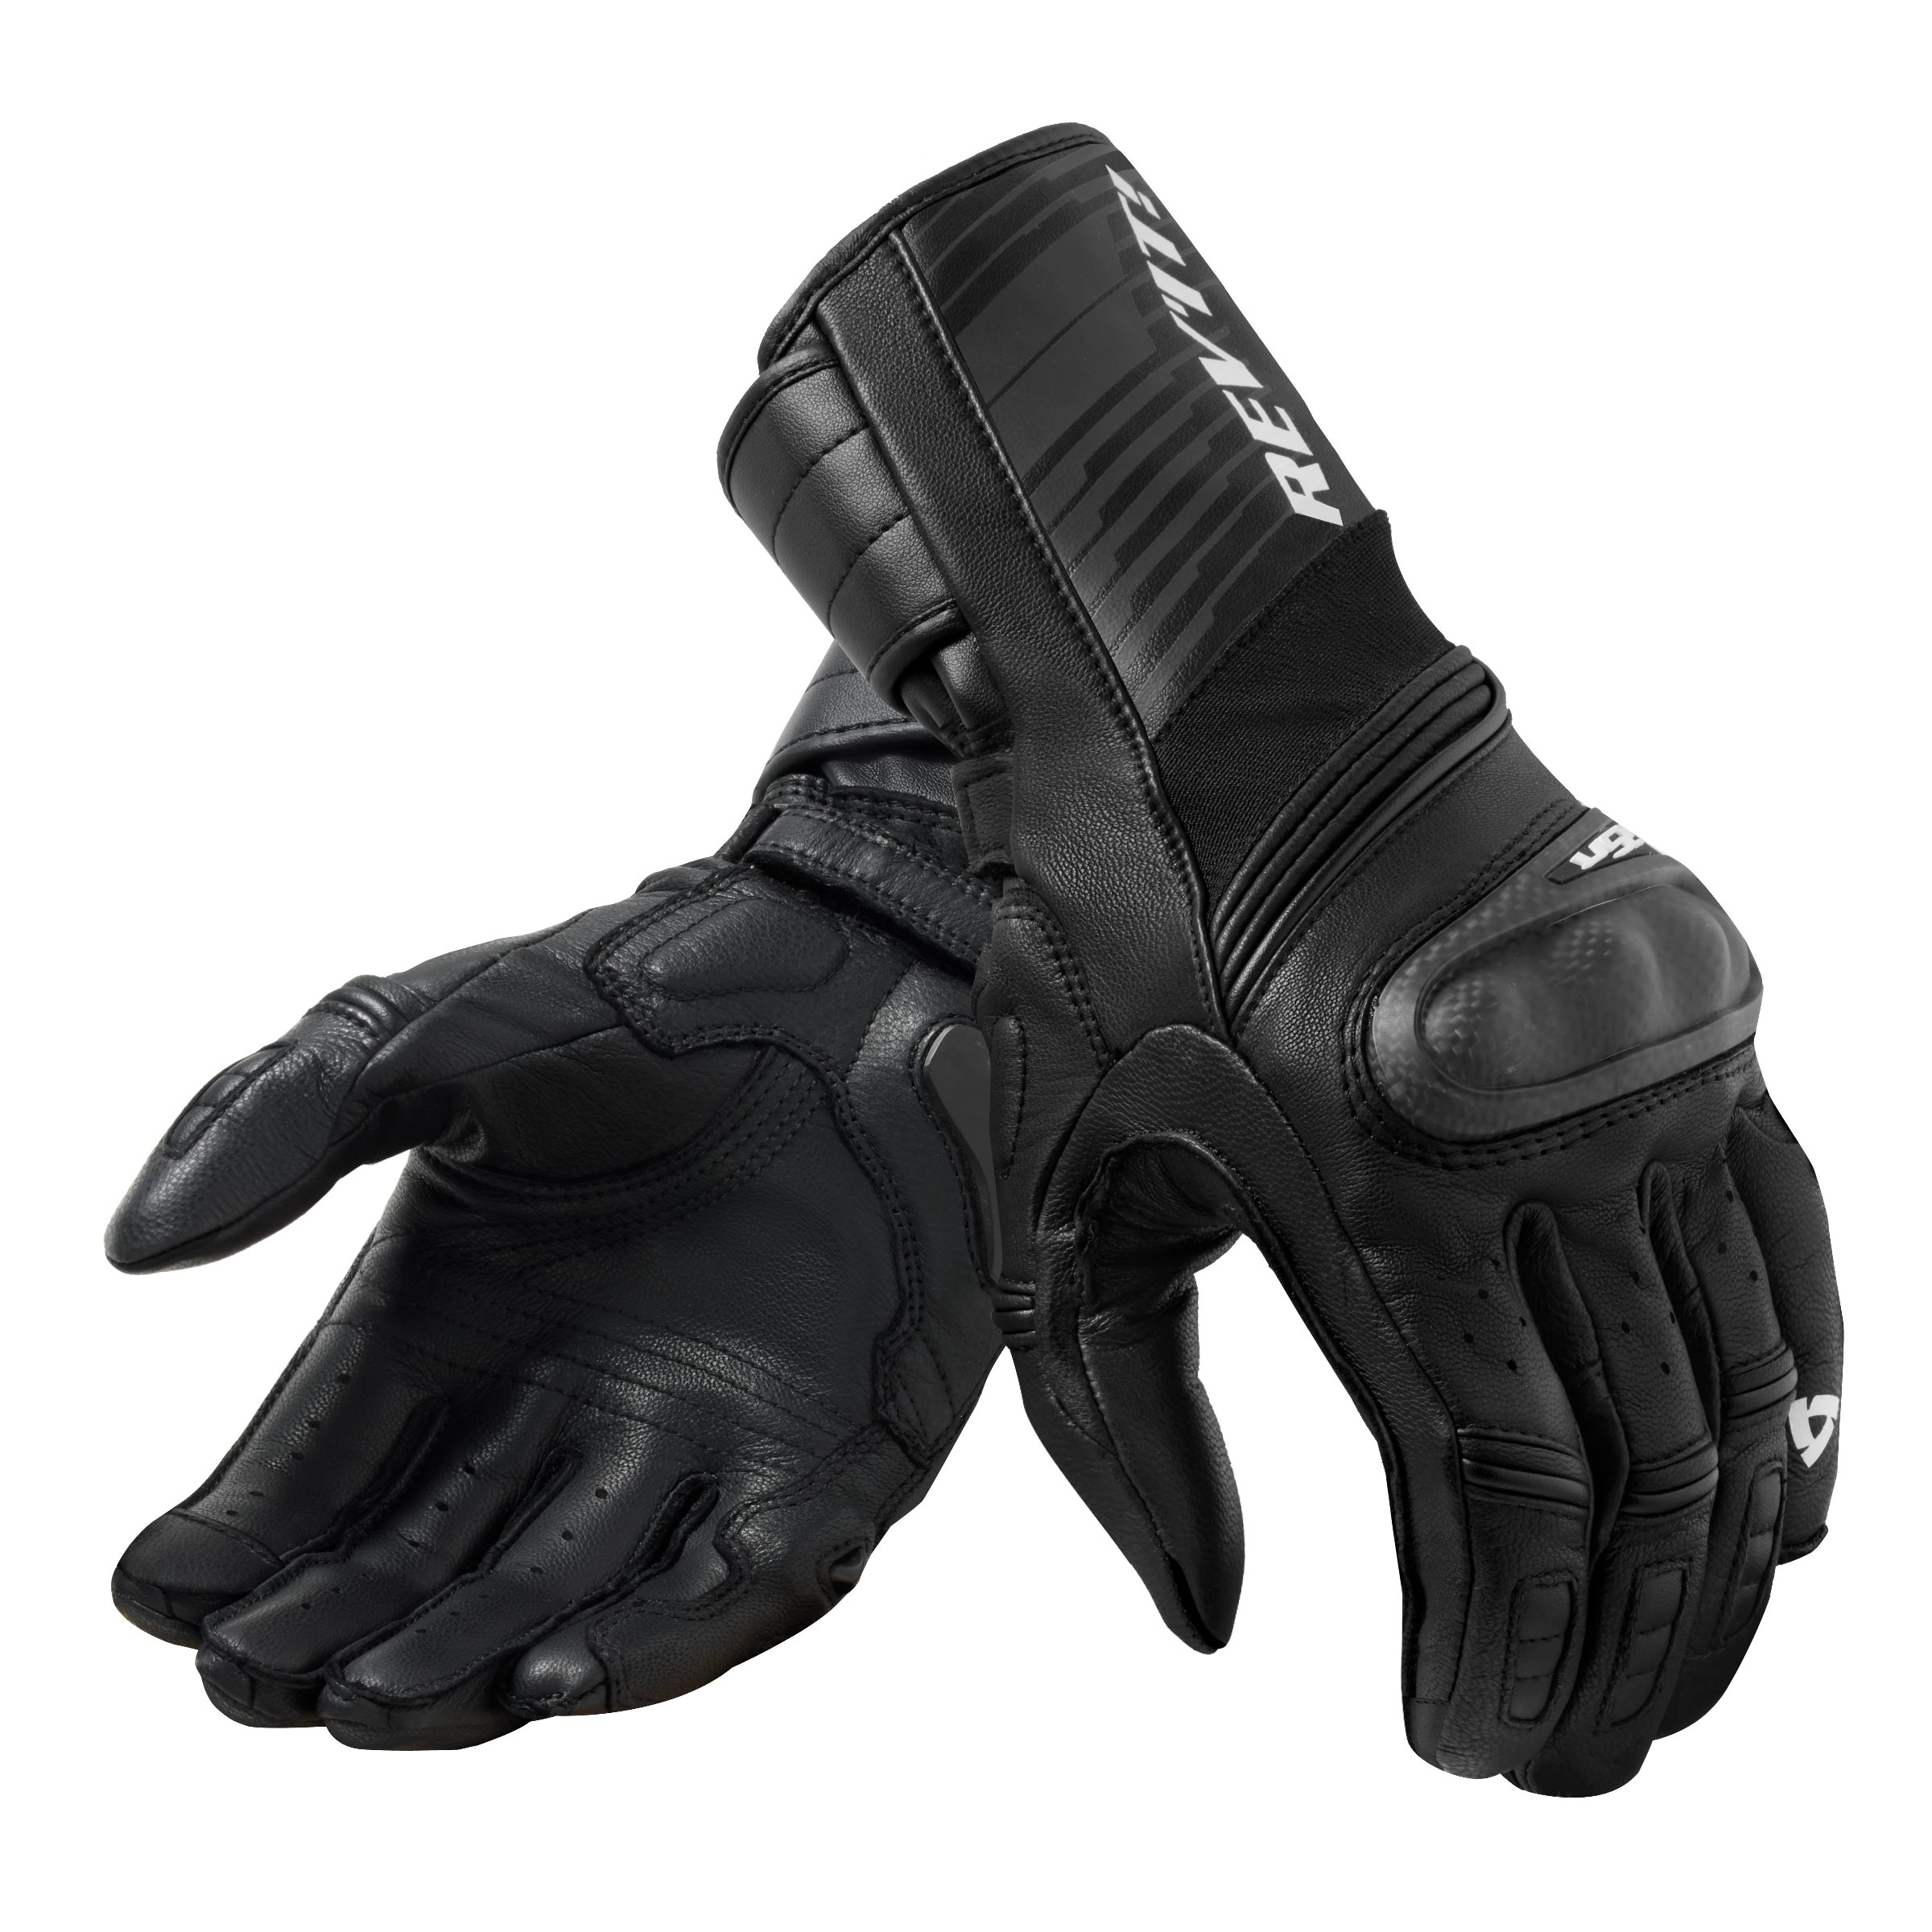 Black Leather Motorcycle Gloves Vented Hard Knuckle Protection Racing Gloves 